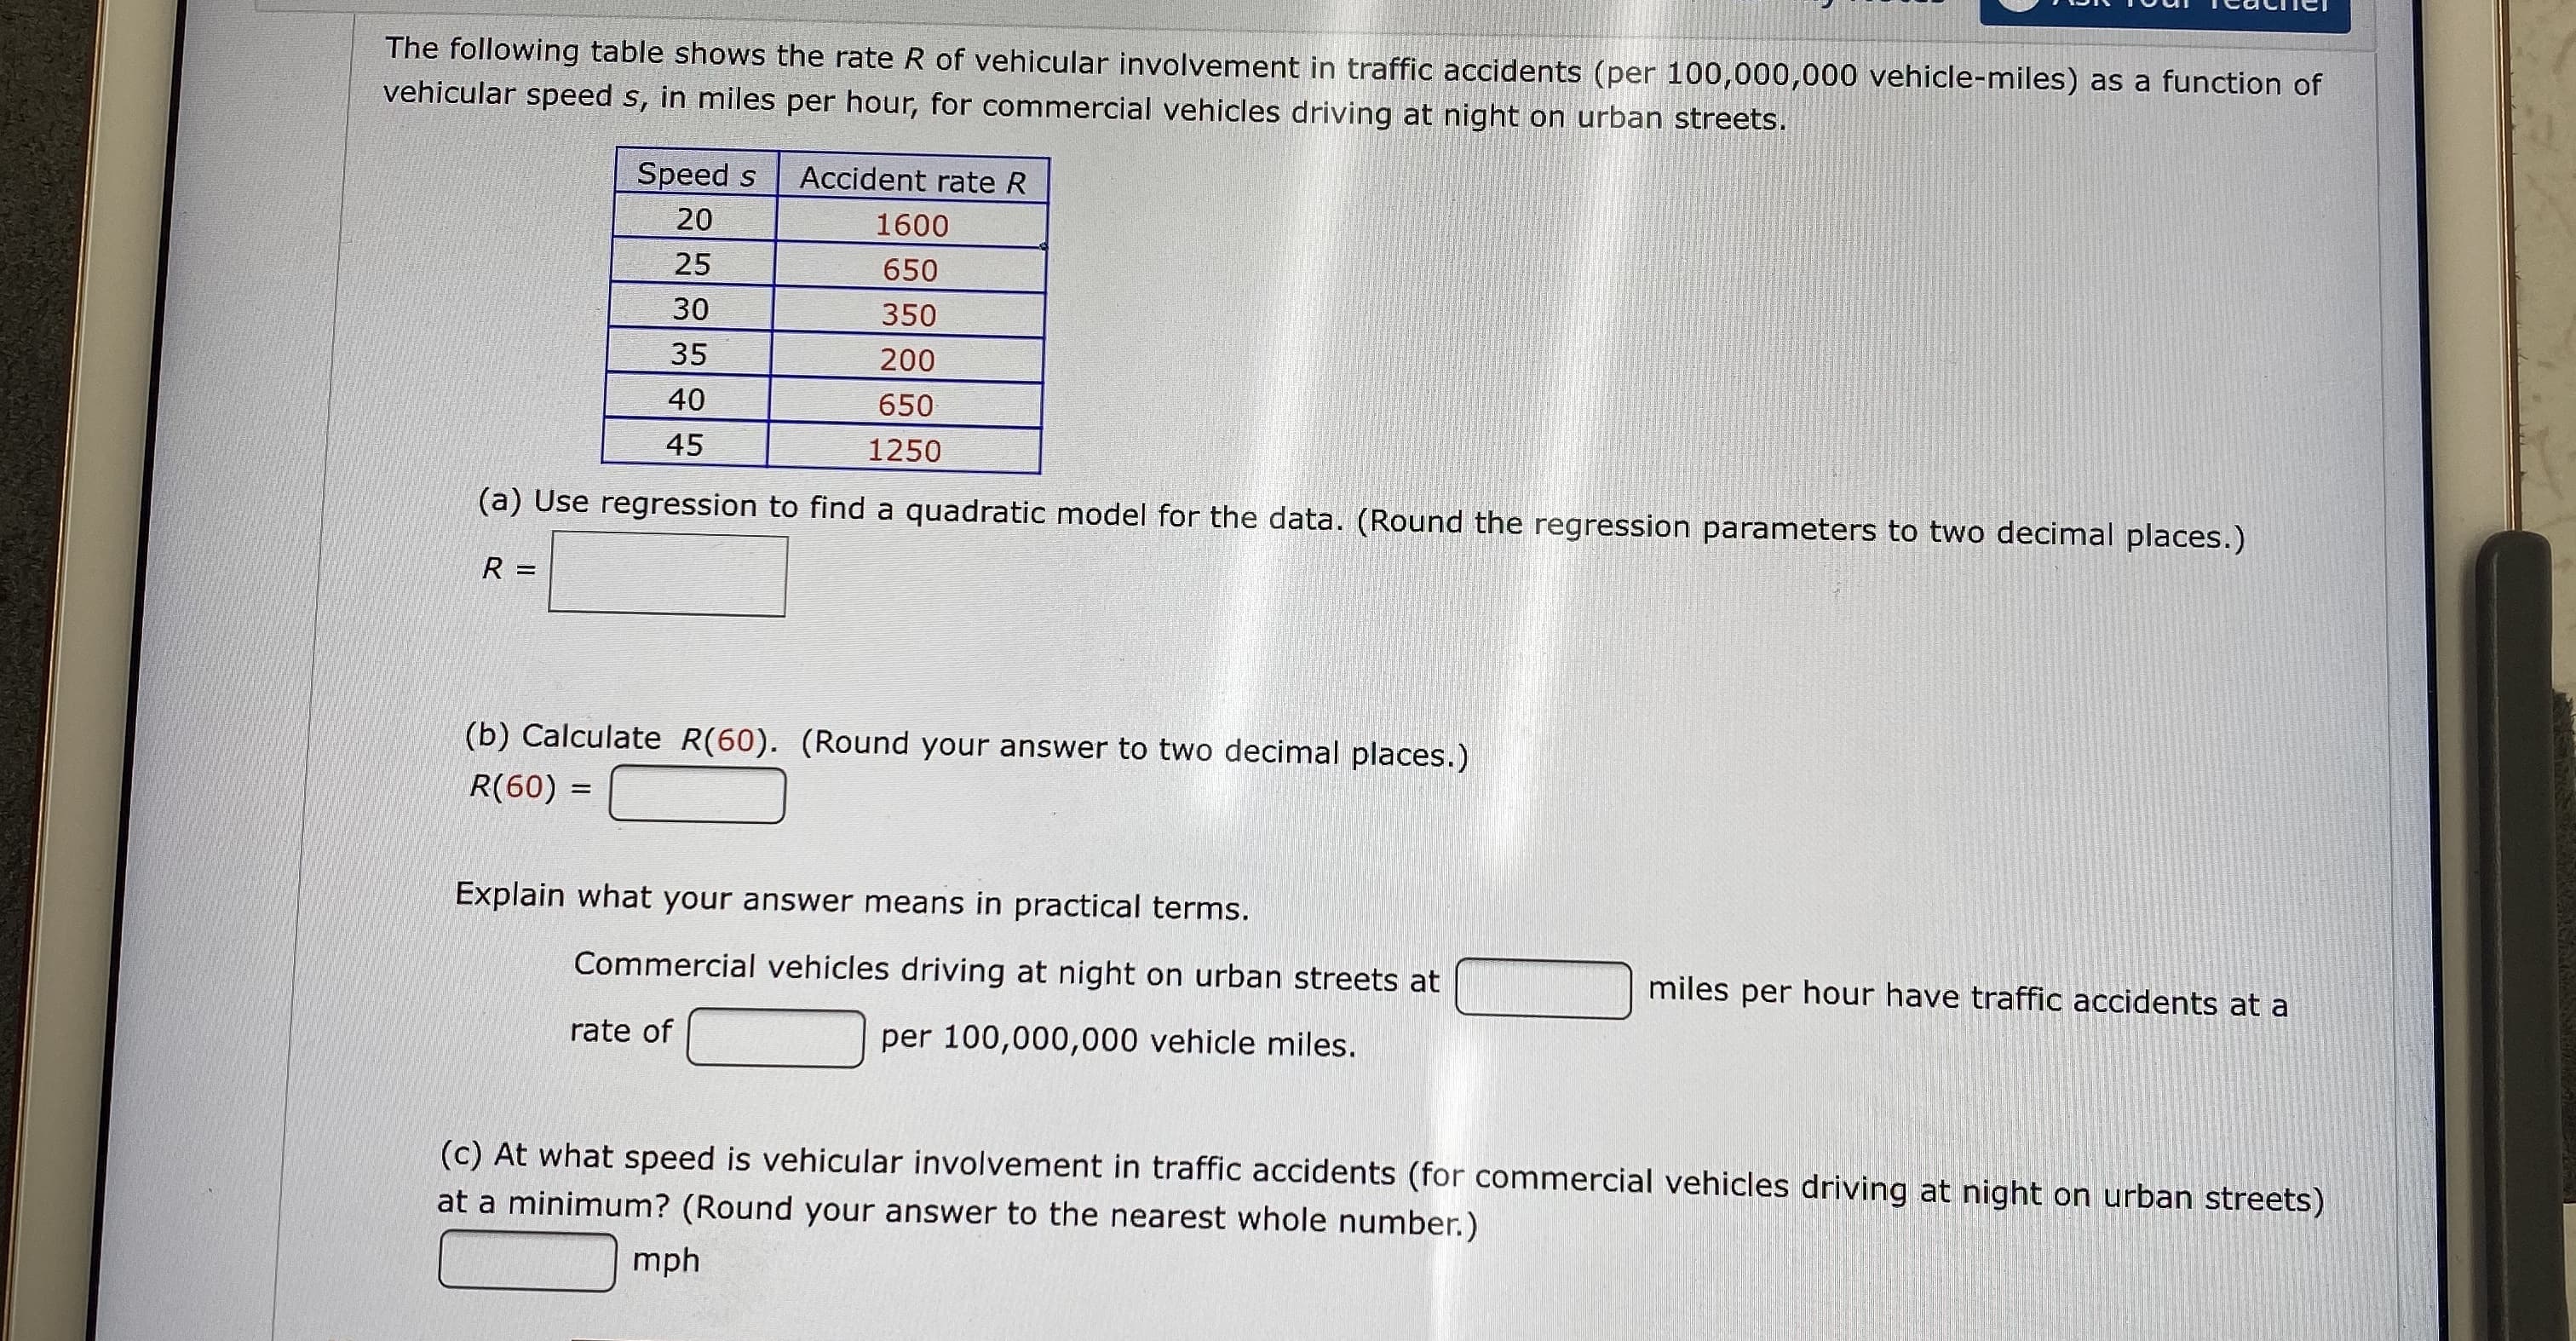 The following table shows the rate R of vehicular involvement in traffic accidents (per 100,000,000 vehicle-miles) as a function of
vehicular speed s, in miles per hour, for commercial vehicles driving at night on urban streets.
Speed s
Accident rate R
20
1600
25
650
30
350
35
200
40
650
45
1250
(a) Use regression to find a quadratic model for the data. (Round the regression parameters to two decimal places.)
R
(b) Calculate R(60). (Round your answer to two decimal places.)
R(60) =
Explain what your answer means in practical terms.
Commercial vehicles driving at night on urban streets at
miles per hour have traffic accidents at a
rate of
per 100,000,000 vehicle miles.
(c) At what speed is vehicular involvement in traffic accidents (for commercial vehicles driving at night on urban streets)
at a minimum? (Round your answer to the nearest whole number.)
mph
